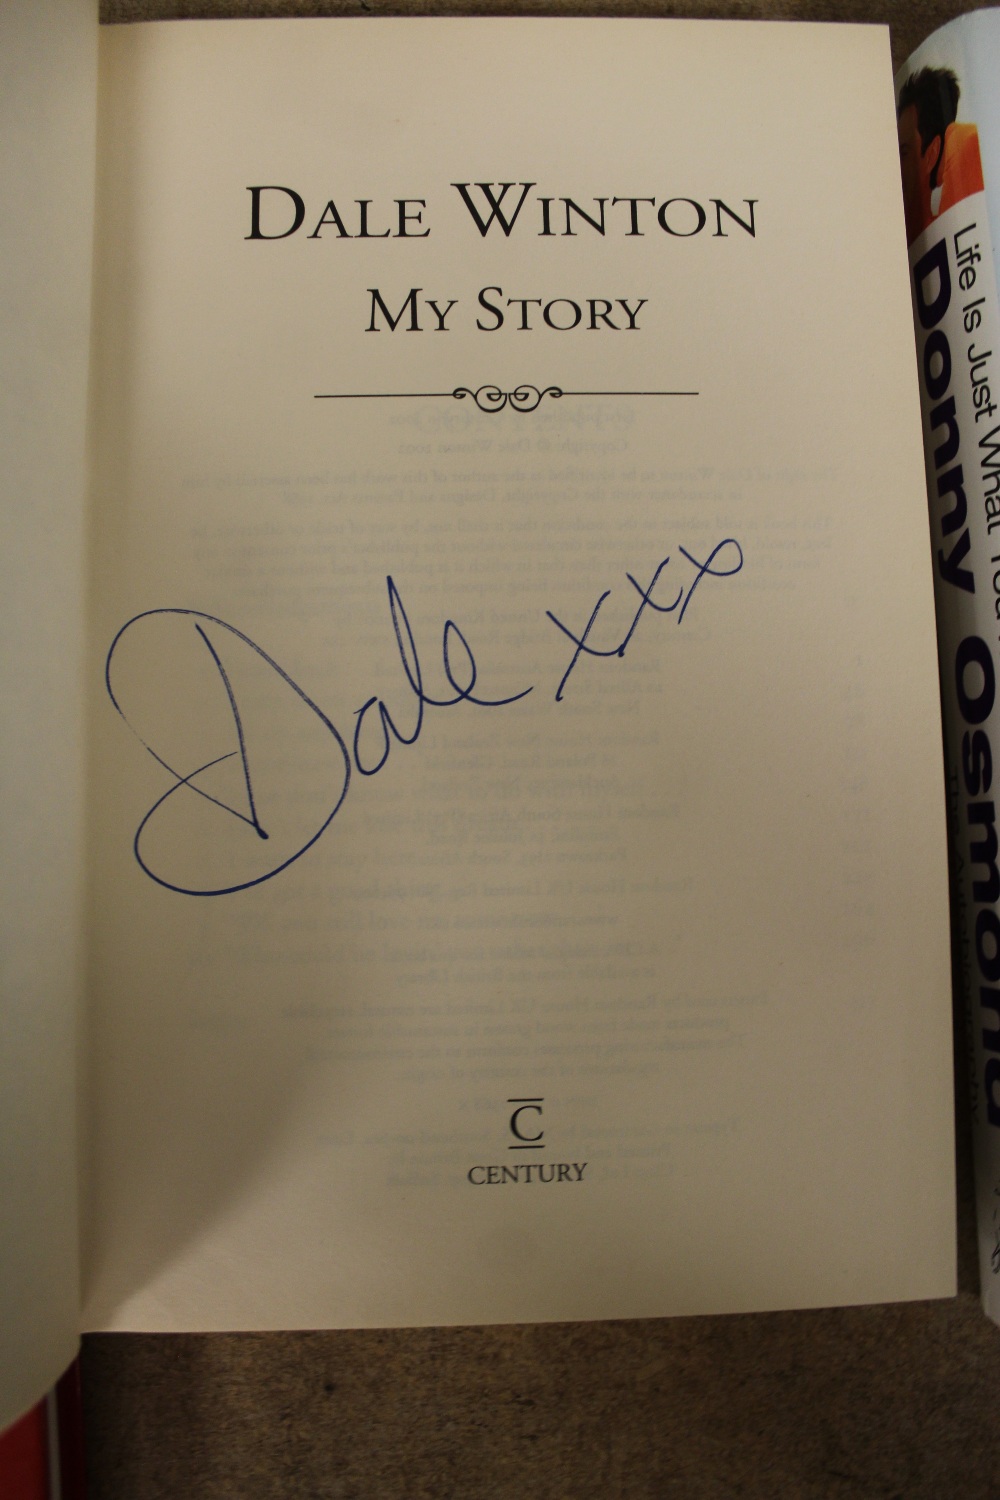 Winton [Dale] - My Story, signed first edition, 2002, hardback with dustwrapper - Image 2 of 2